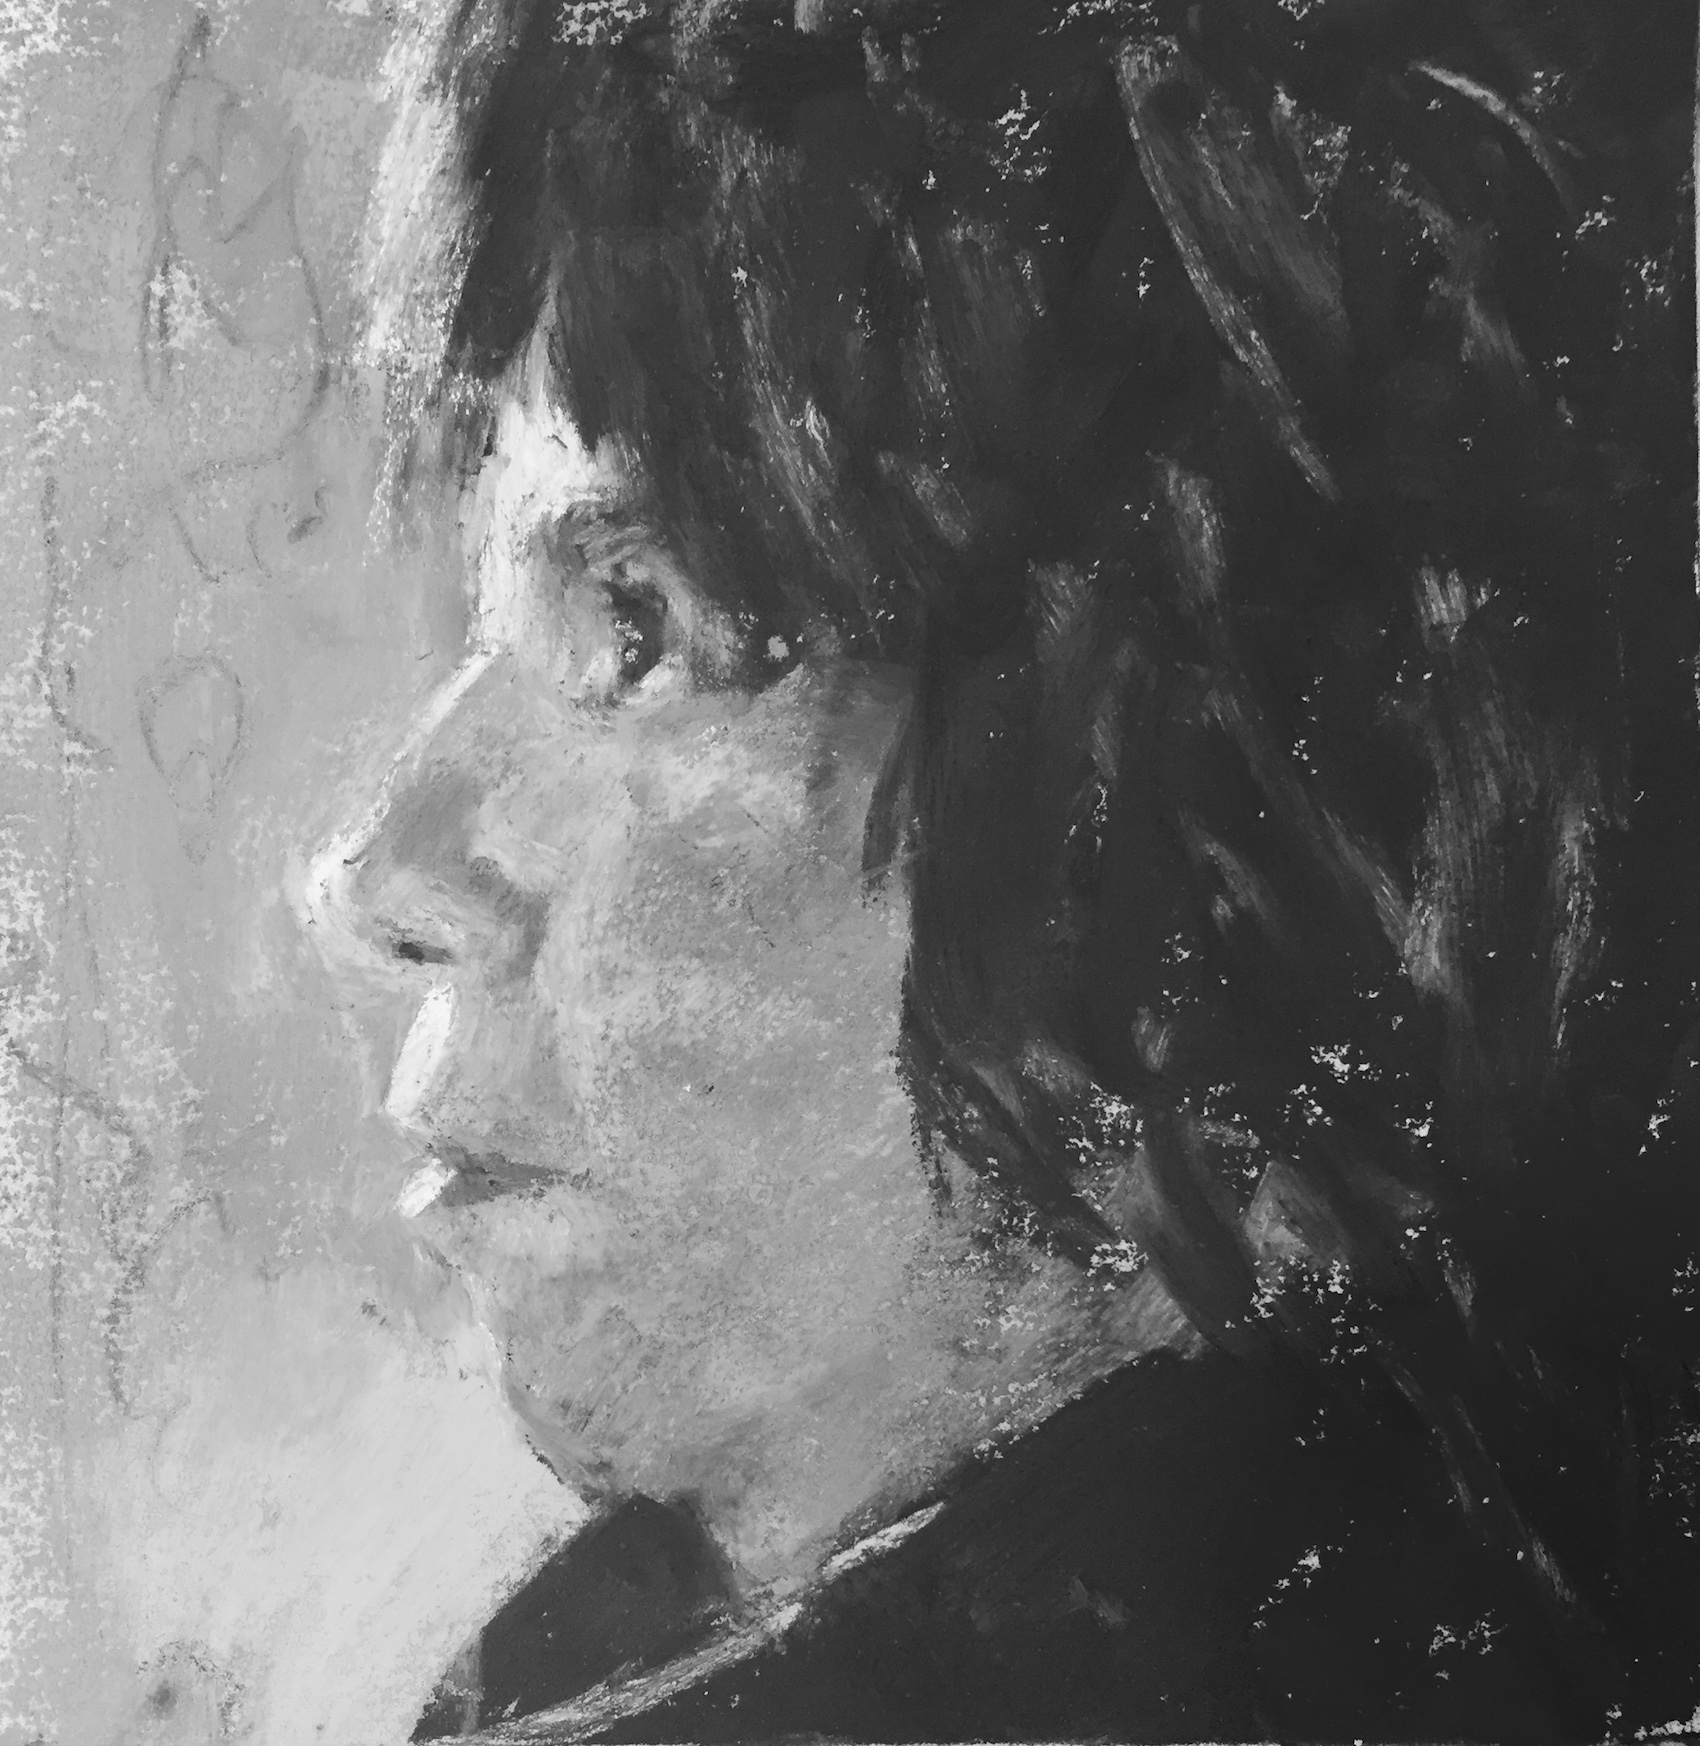 Do something, anything! Gail Sibley, "Me in Profile," Unison pastels on UART 240 grade, 6 x 6 in - in black and white